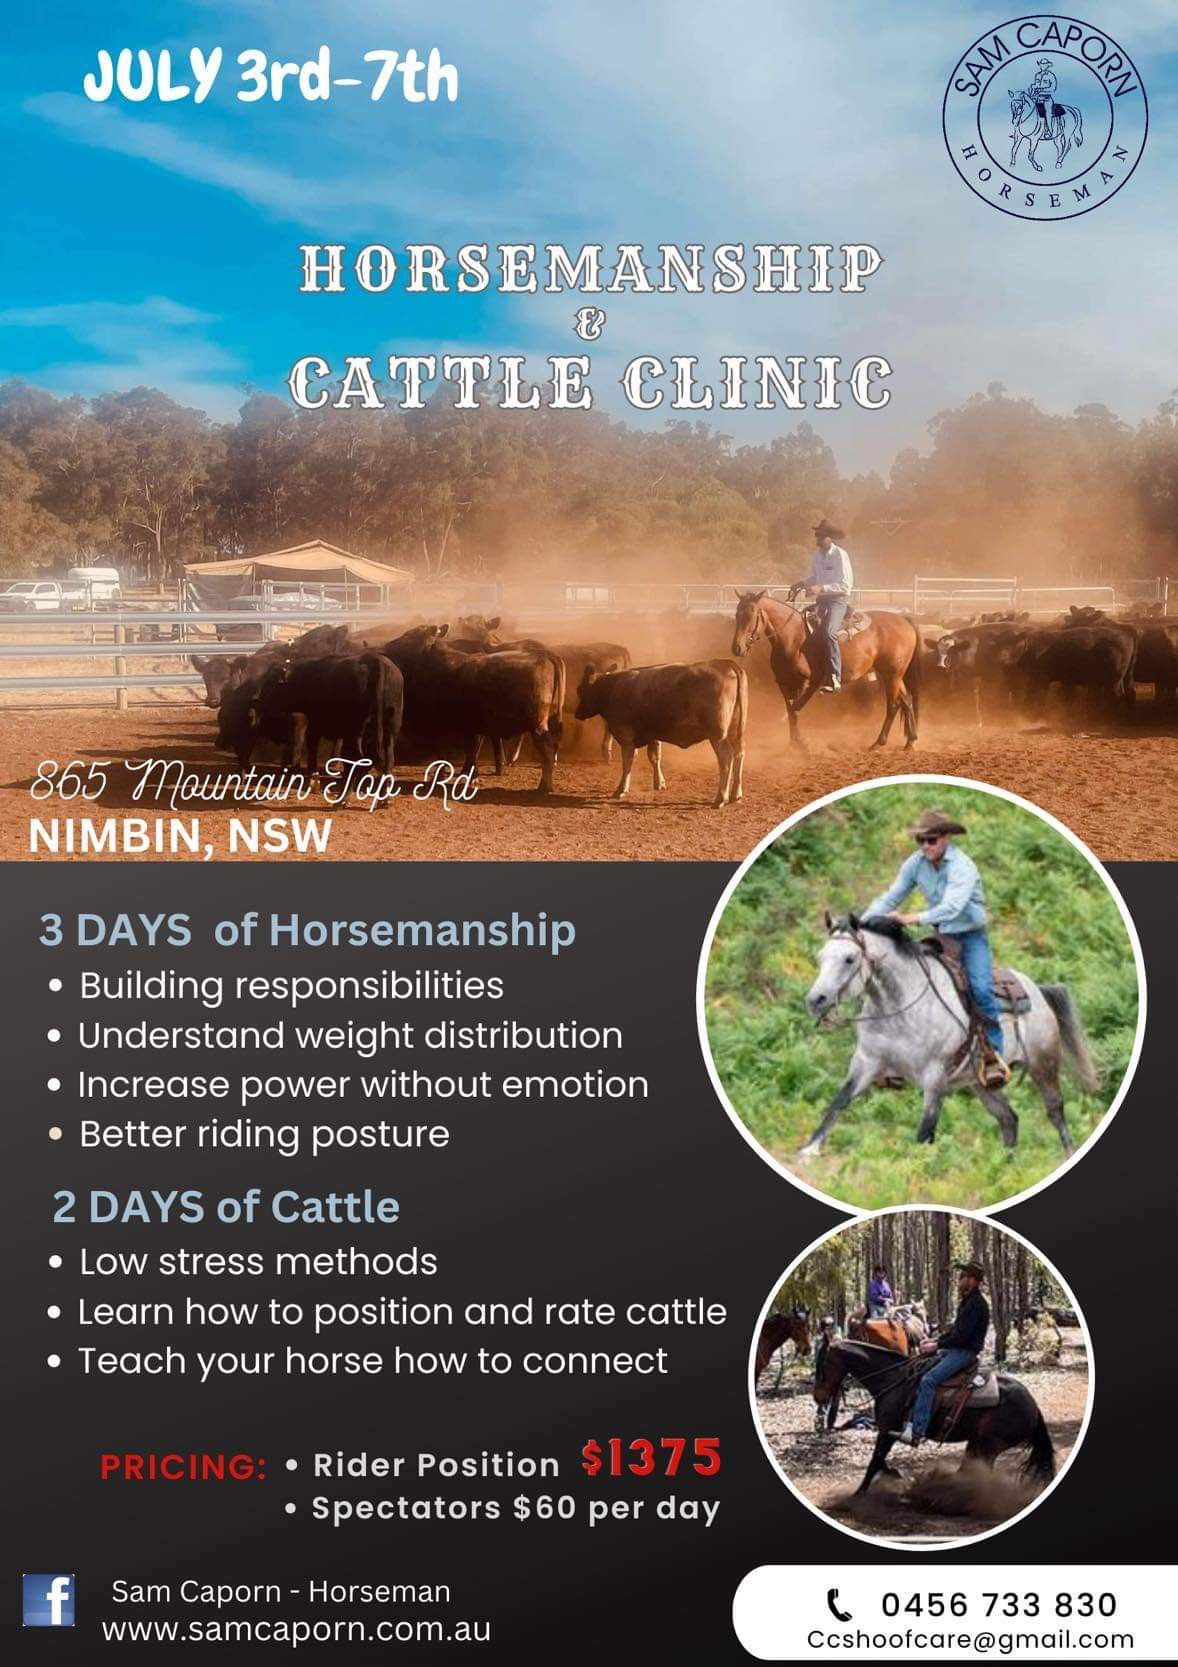 5 Days with Sam Caporn - Horsemanship and Cattle Clinic 